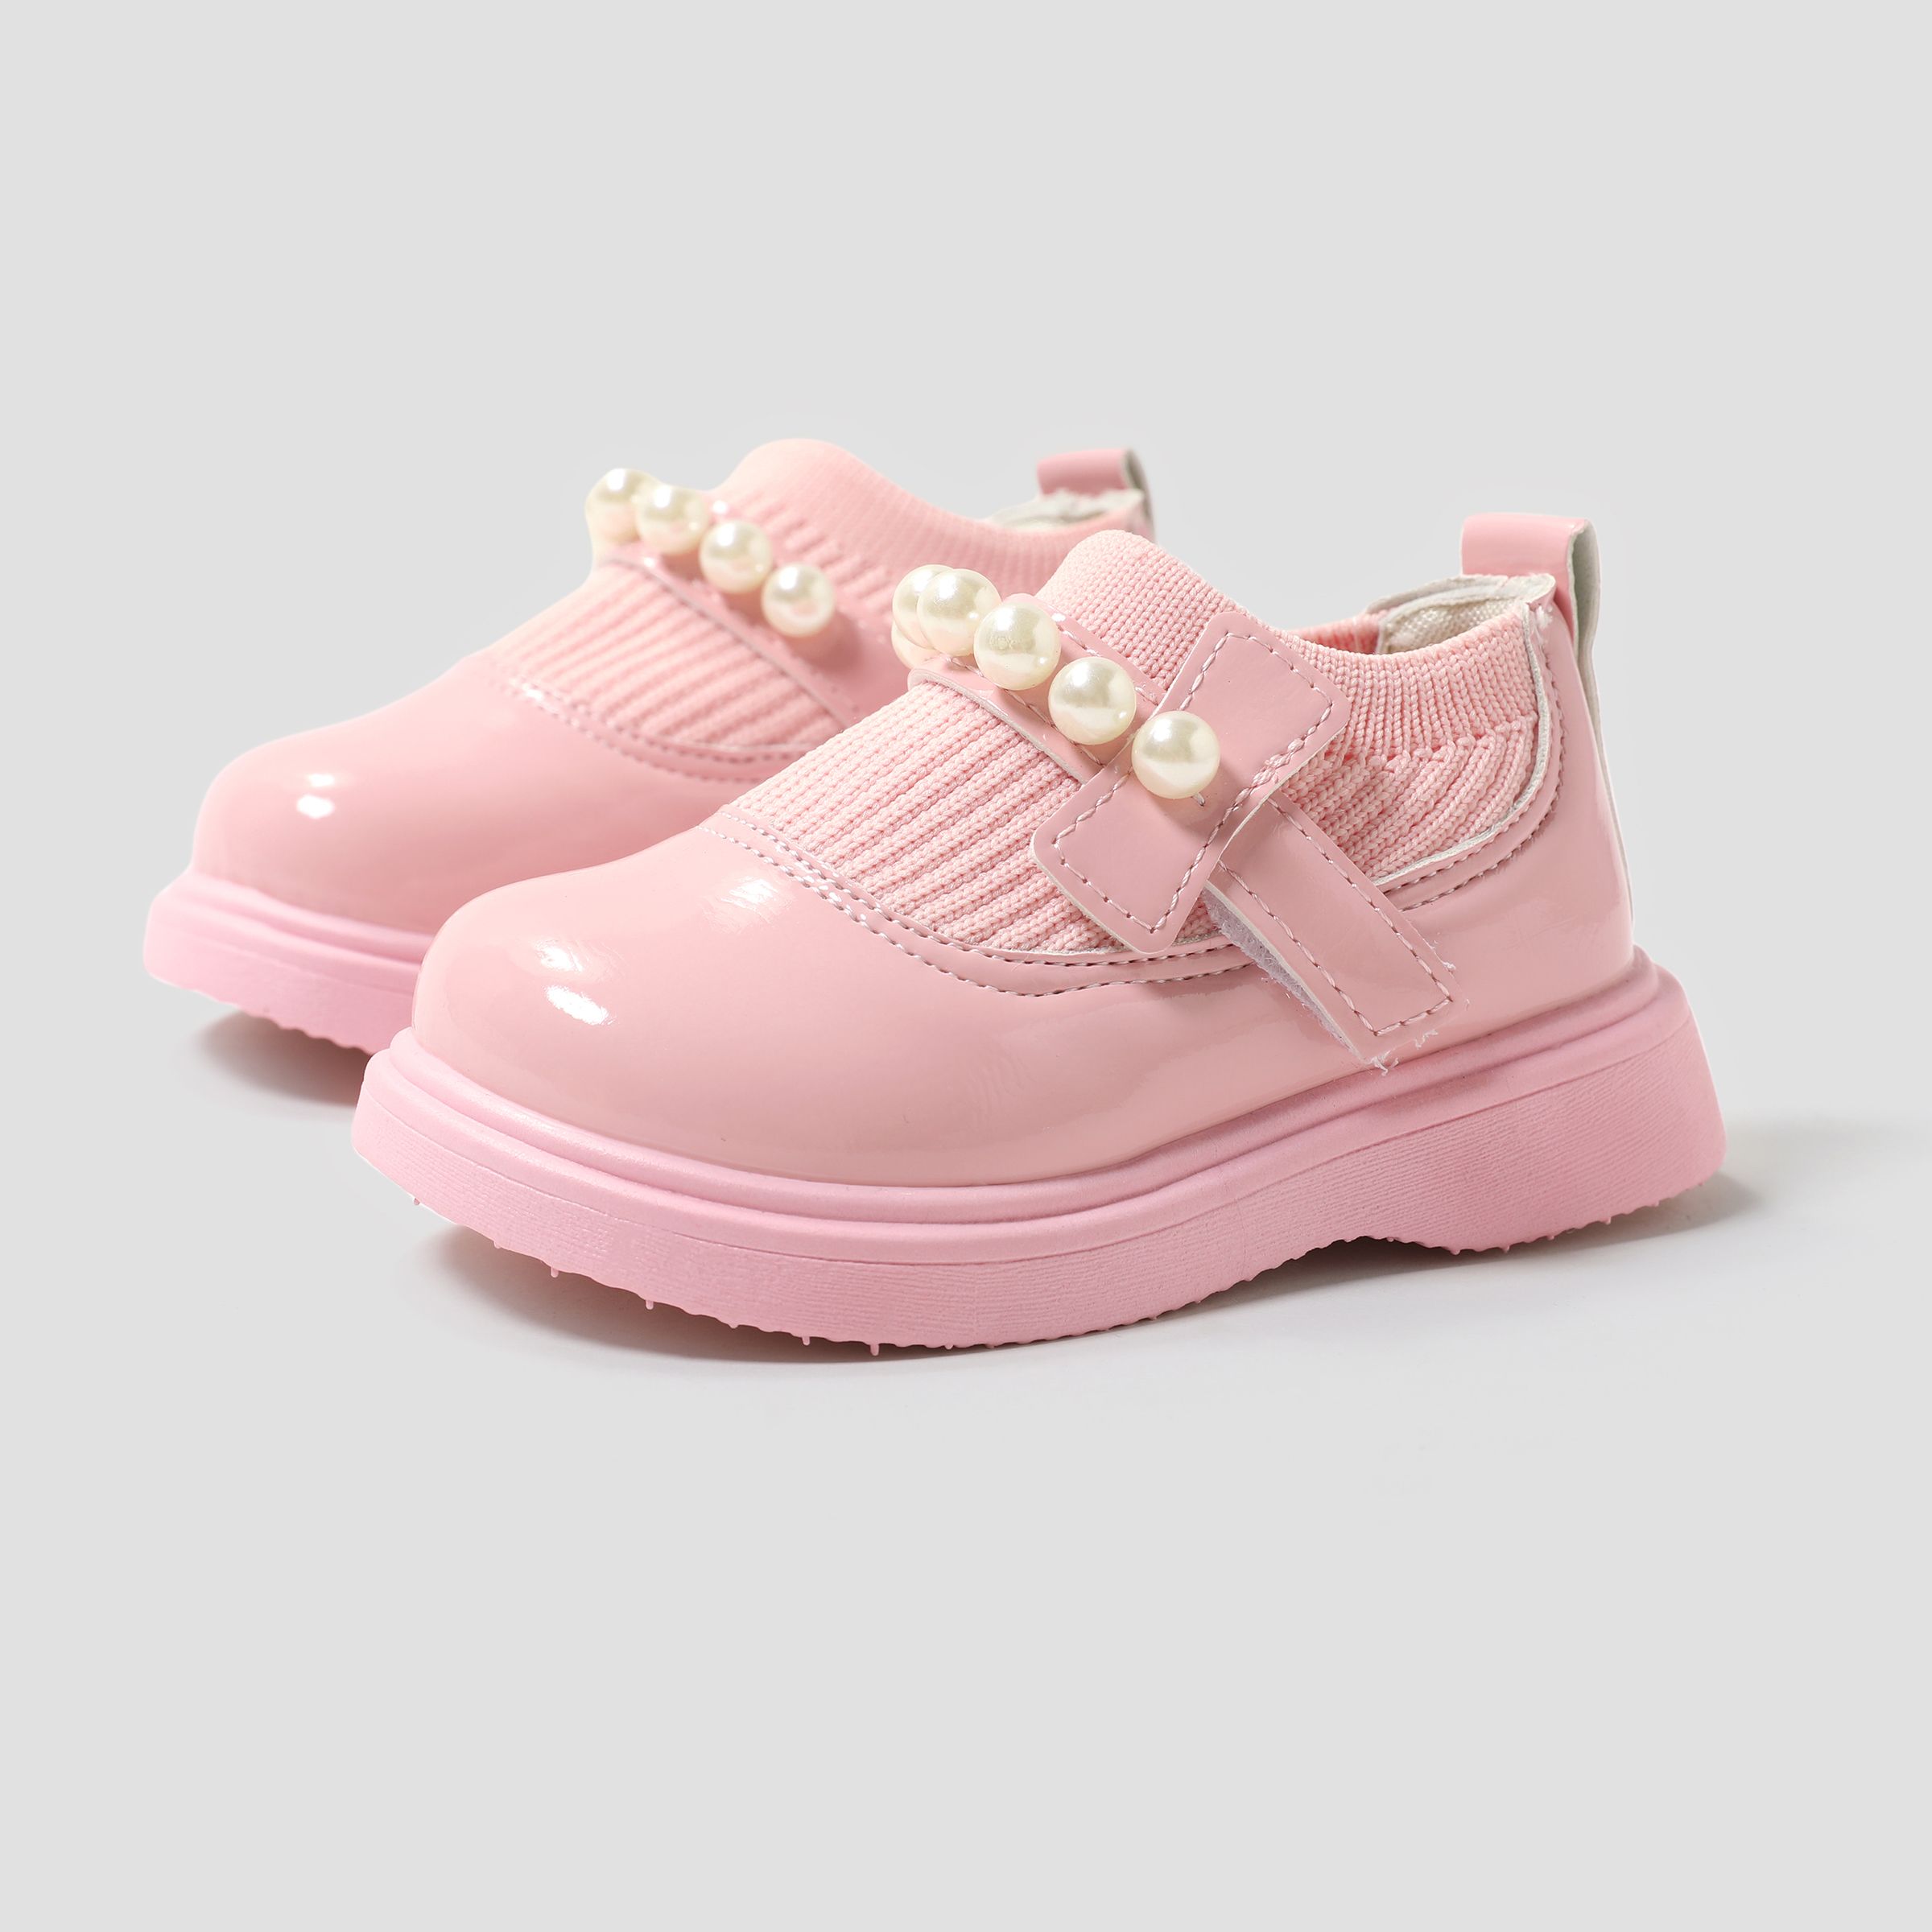 Toddler/Kids Girl Casual Velcro Pearl Leather Shoes